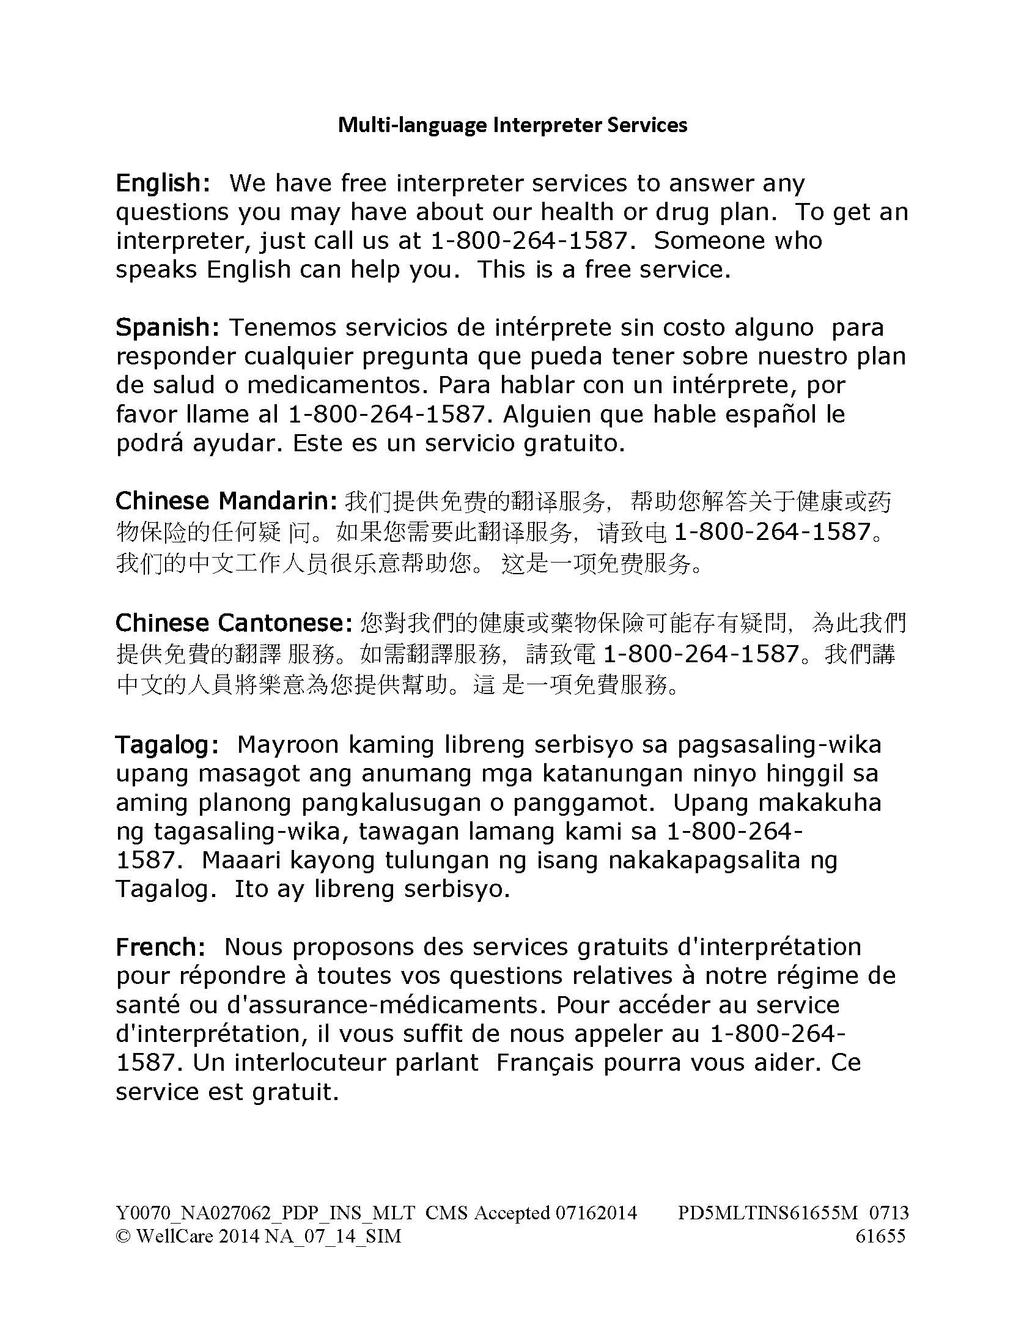 Multi-language Interpreter Services English: We have free interpreter services to answer any questions you may have about our health or drug plan.